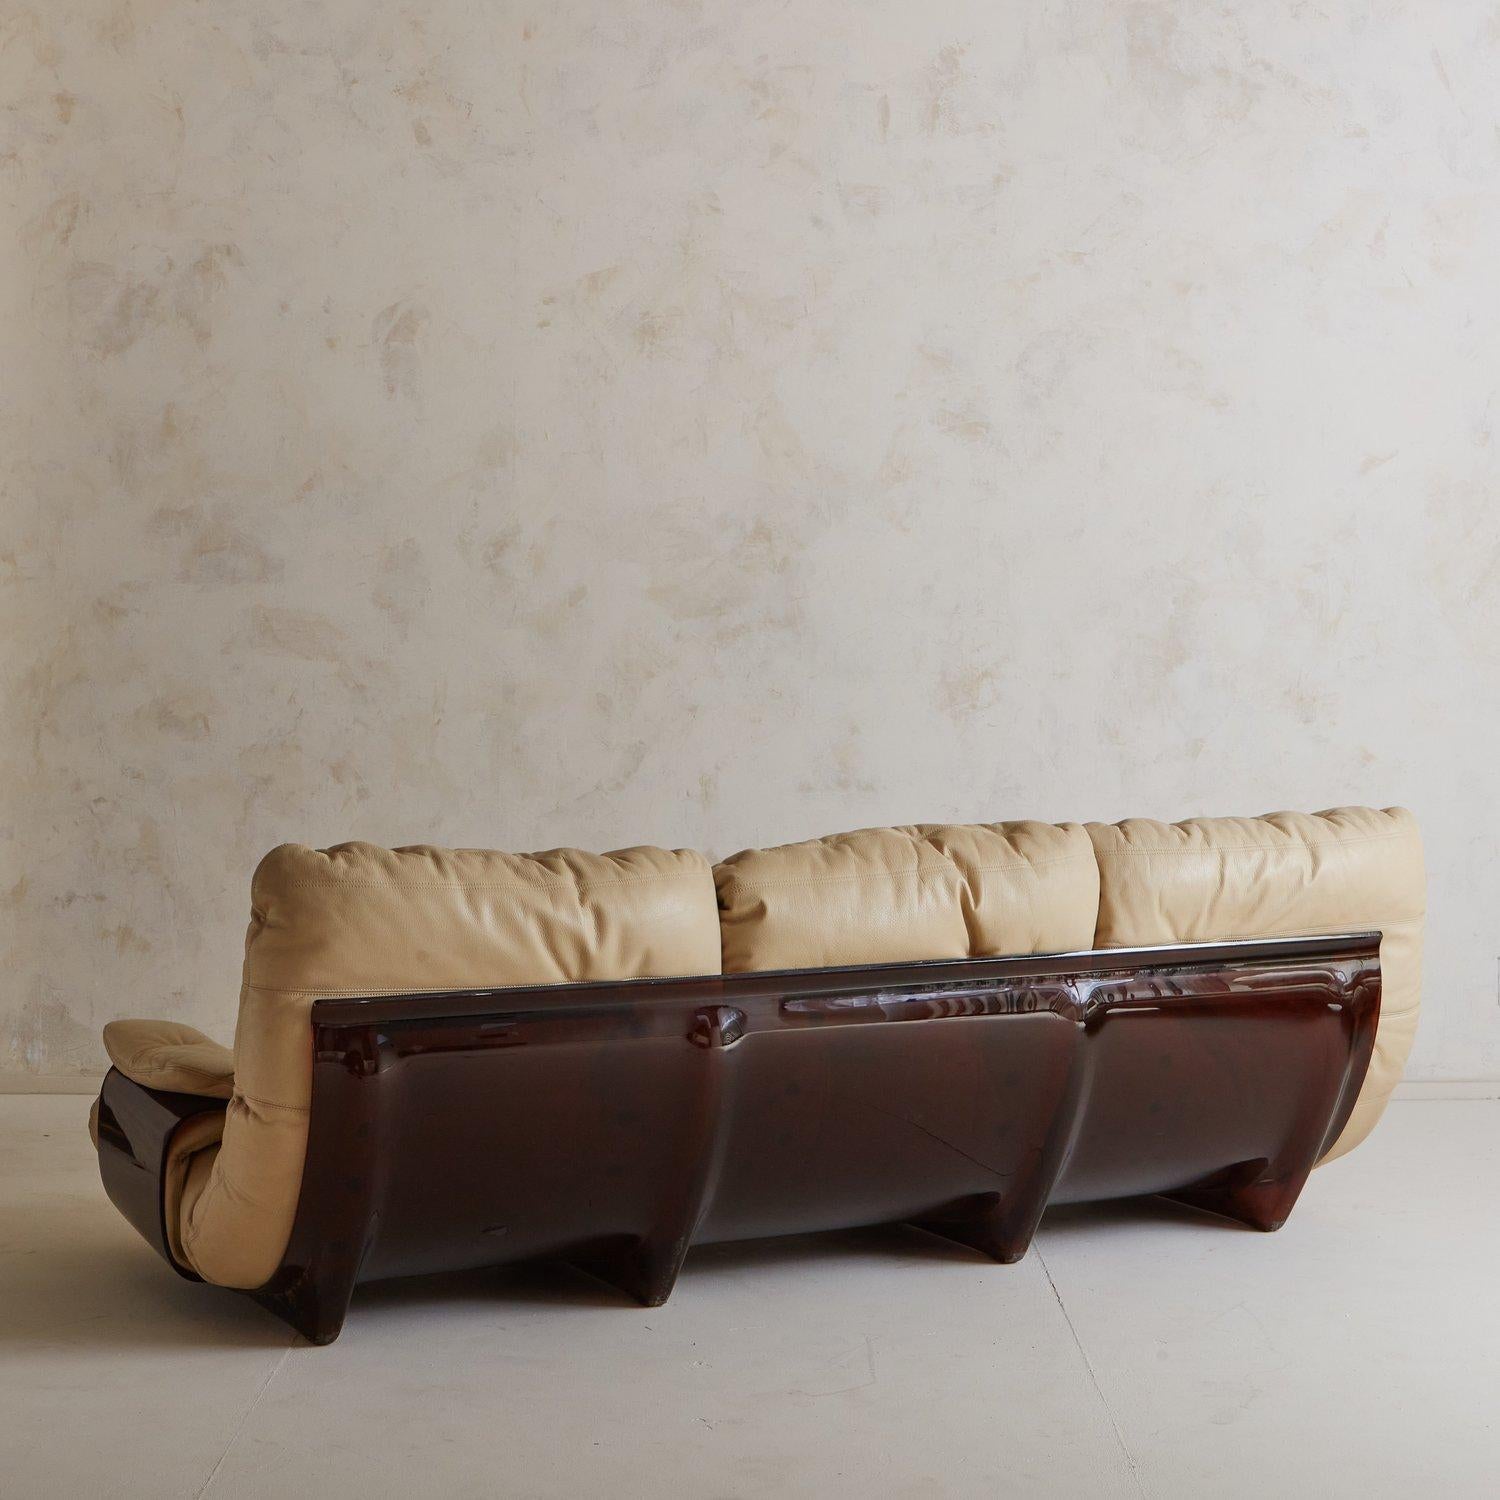 Mid-Century Modern Leather Marsala Three-Seat Sofa by Michel Ducaroy for Lignet Roset, France 1970s For Sale